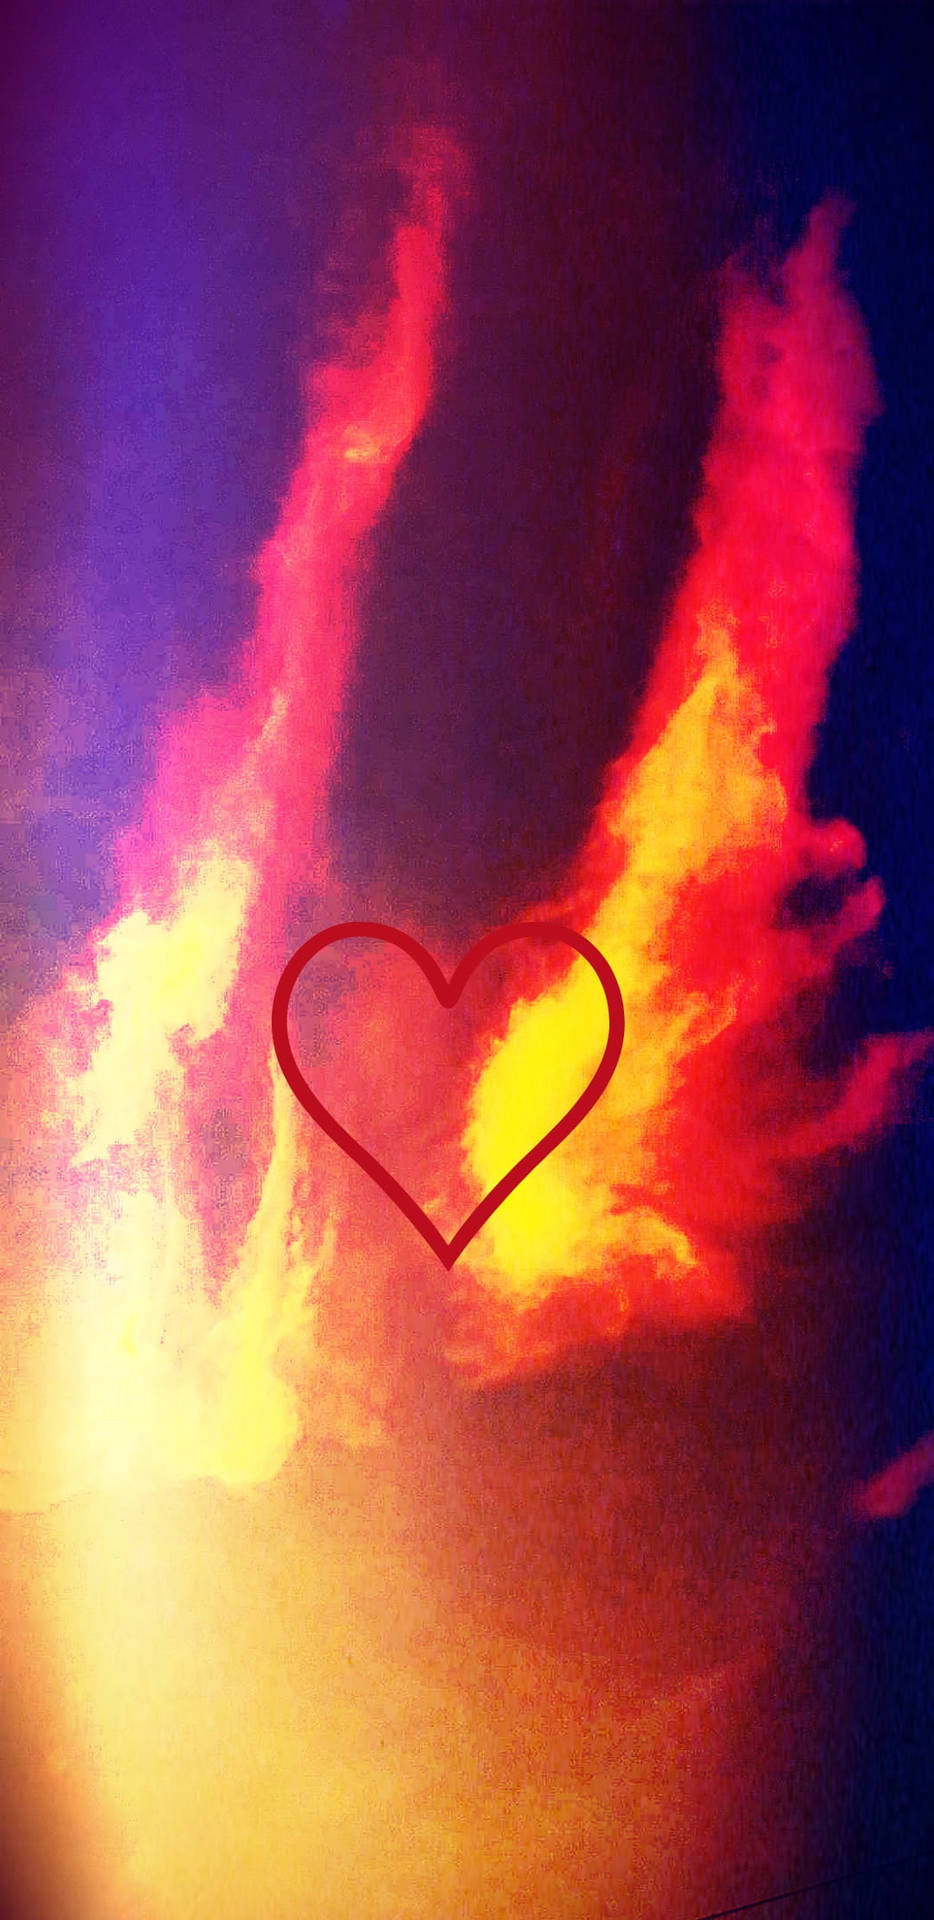 Dramatic Aesthetic Heart With Flames